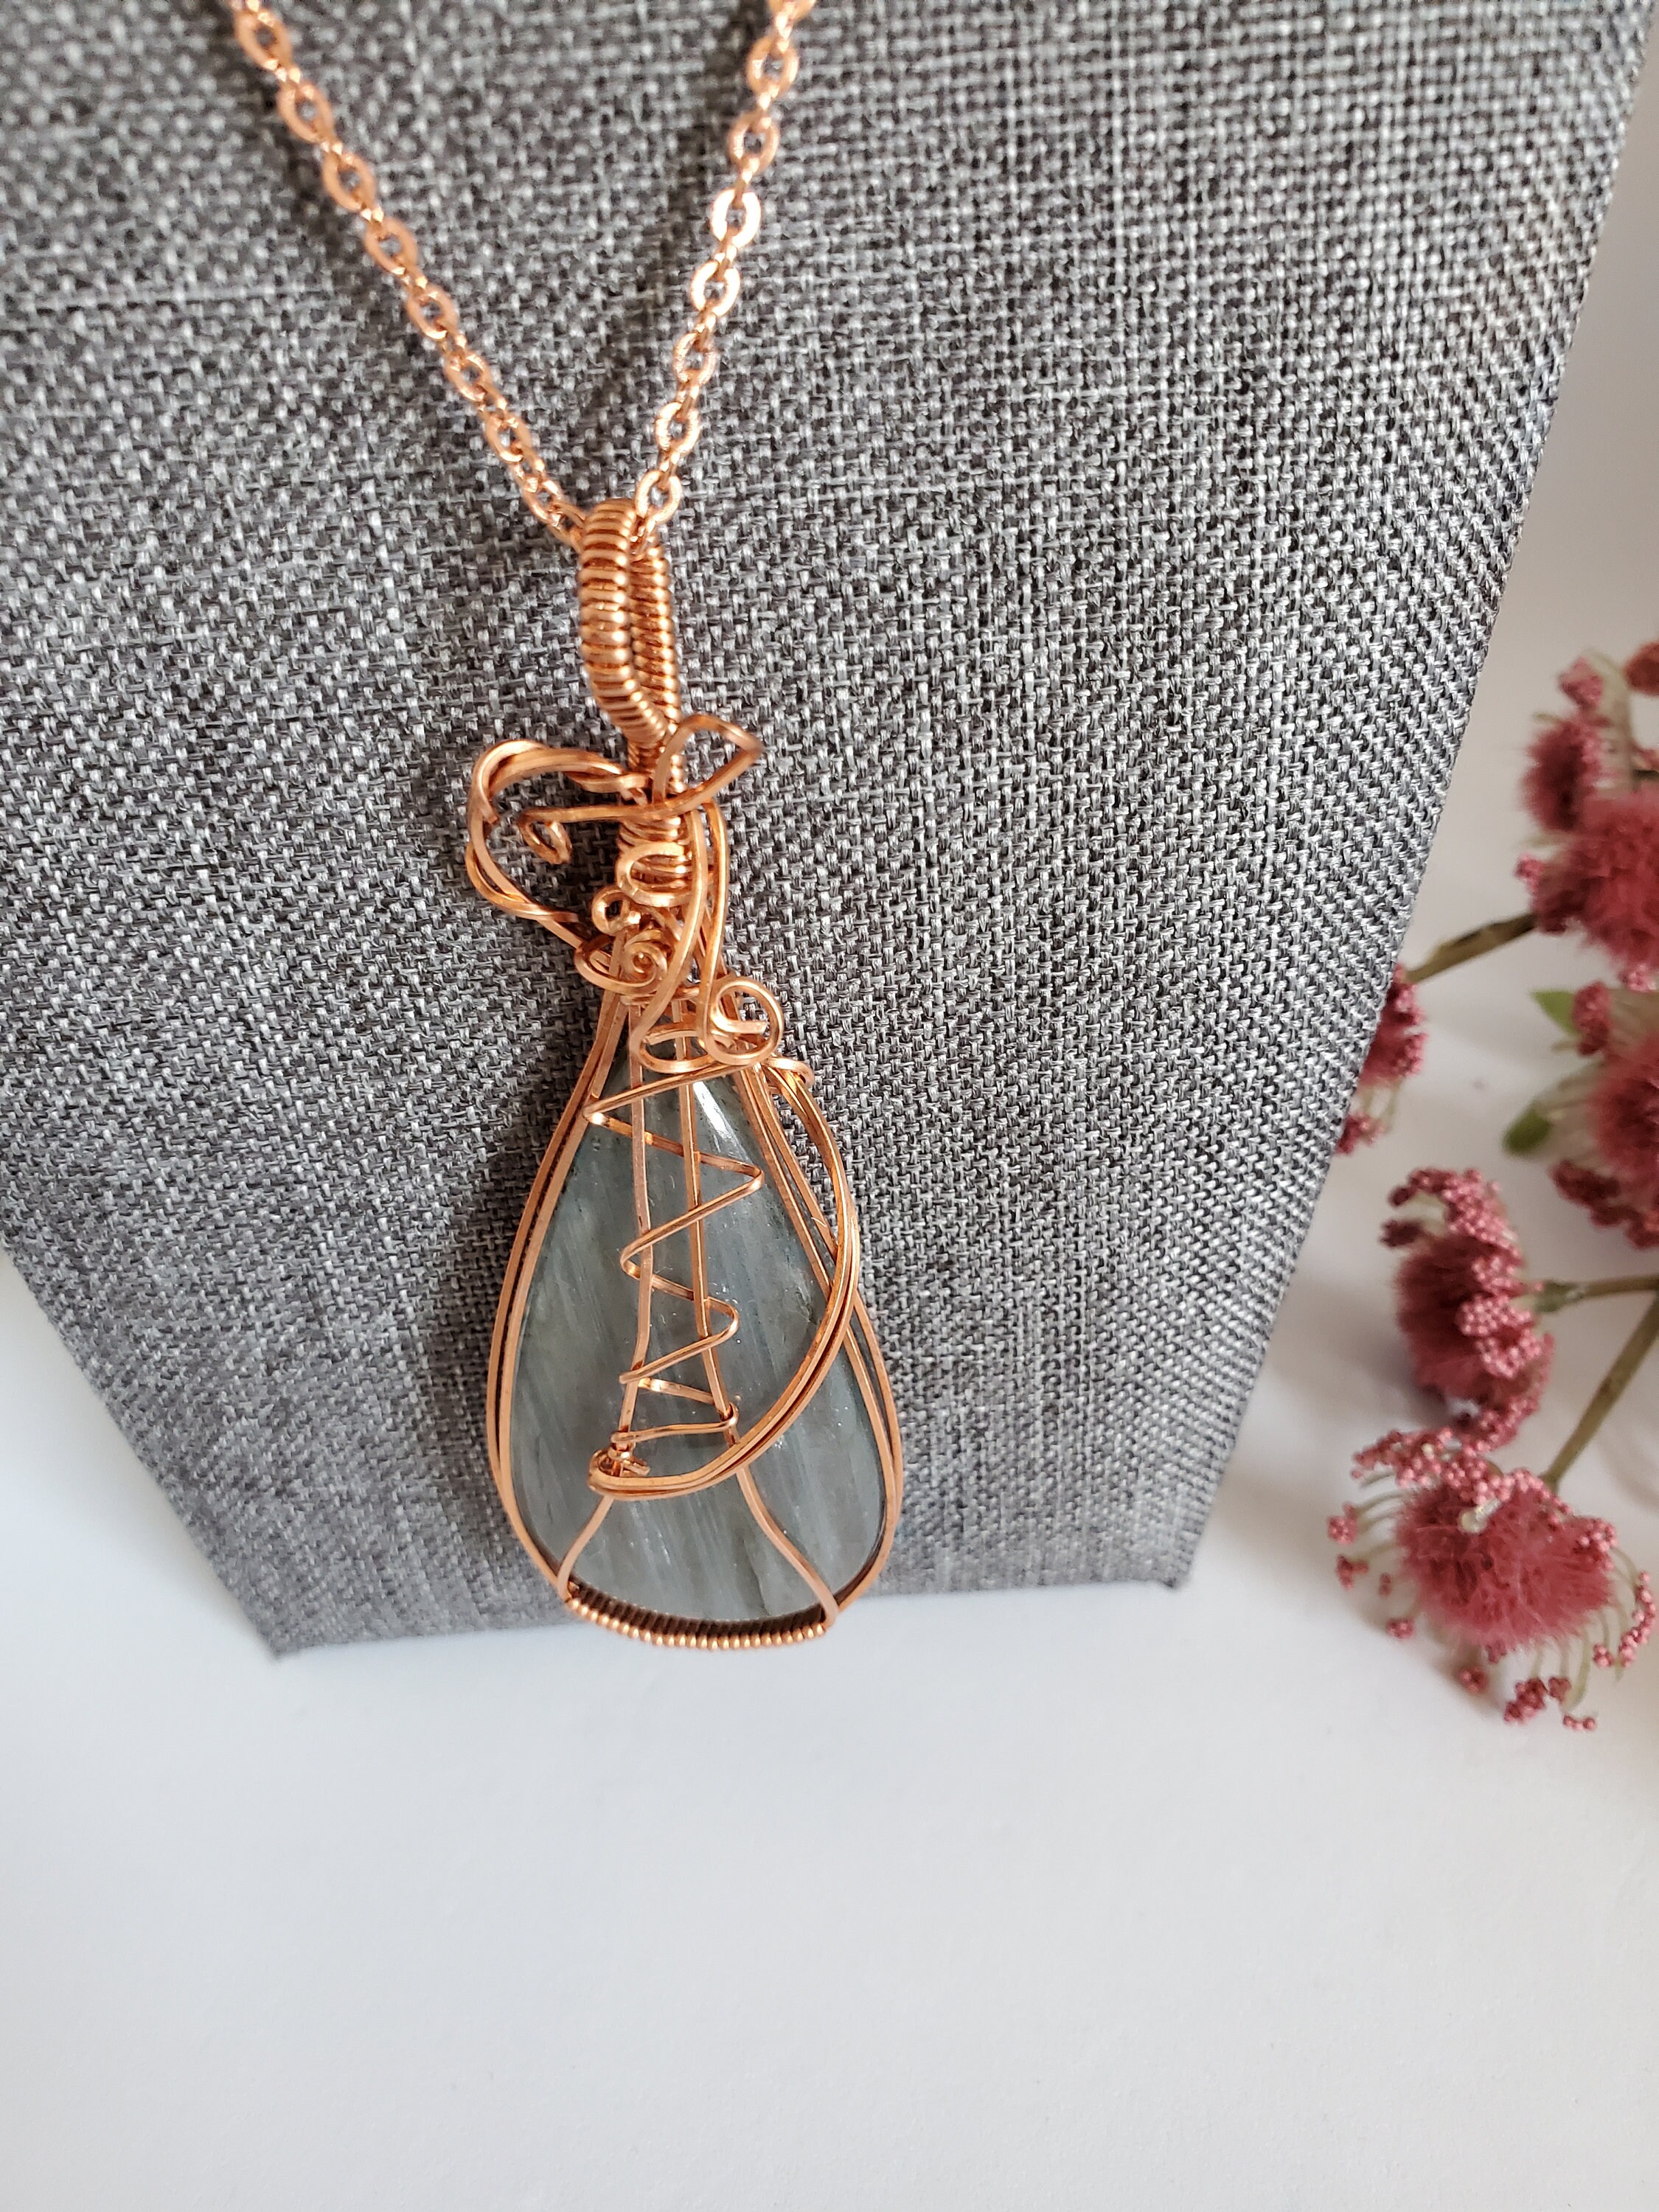 A Copper Wrapped Labradorite Pendant Necklace Flash Jewelry | Etsy